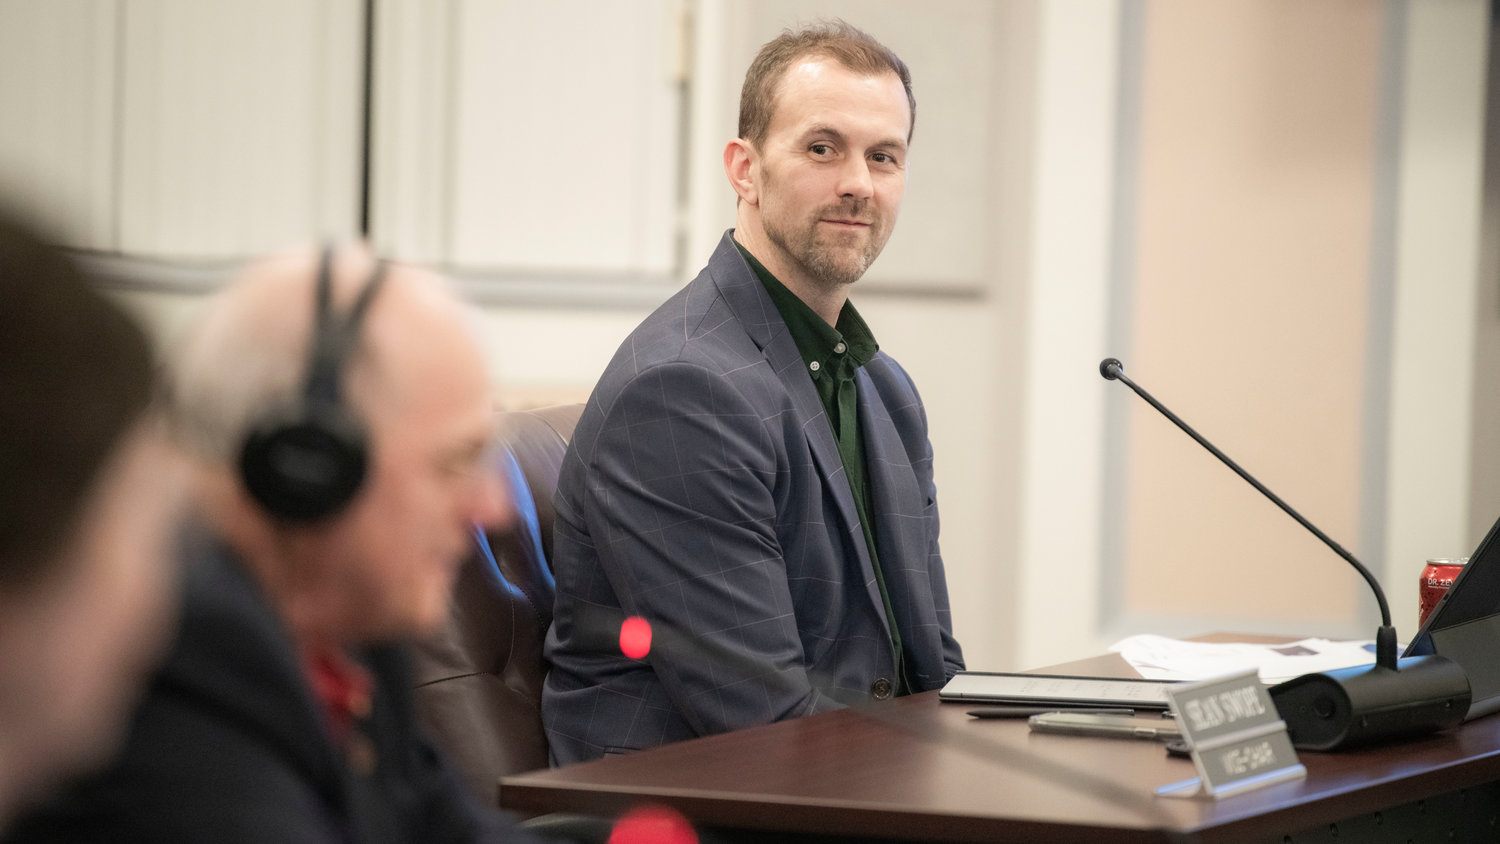 Commissioner Sean Swope smiles while attending a 2023 Preliminary Budget Review meeting on Tuesday at the Lewis County Courthouse in Chehalis.